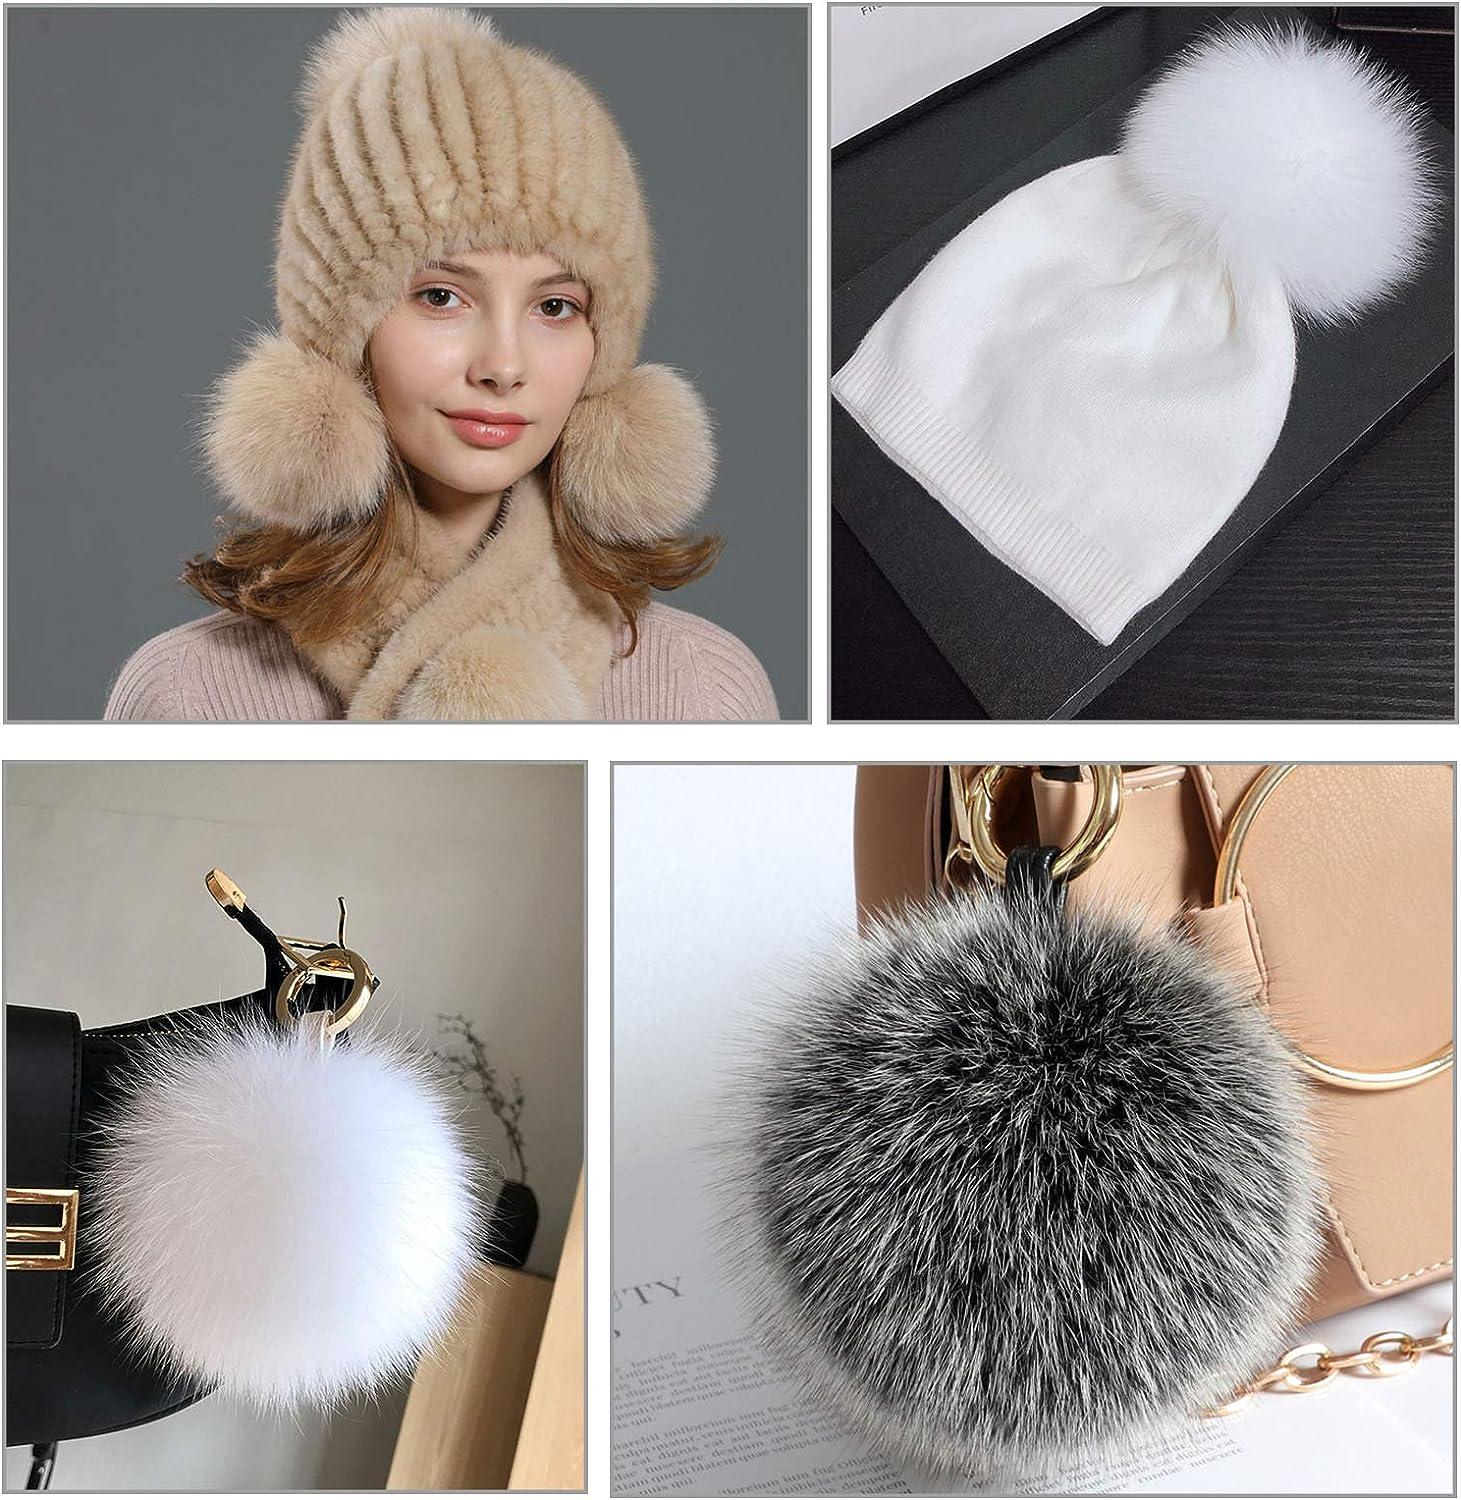  Buryeah 125 Pcs Fur Pom Poms for Hats Bulk Fluffy Pom Poms  Balls with Elastic Loop Removable Knitting Accessories for Shoes Scarves  Beanies Bags